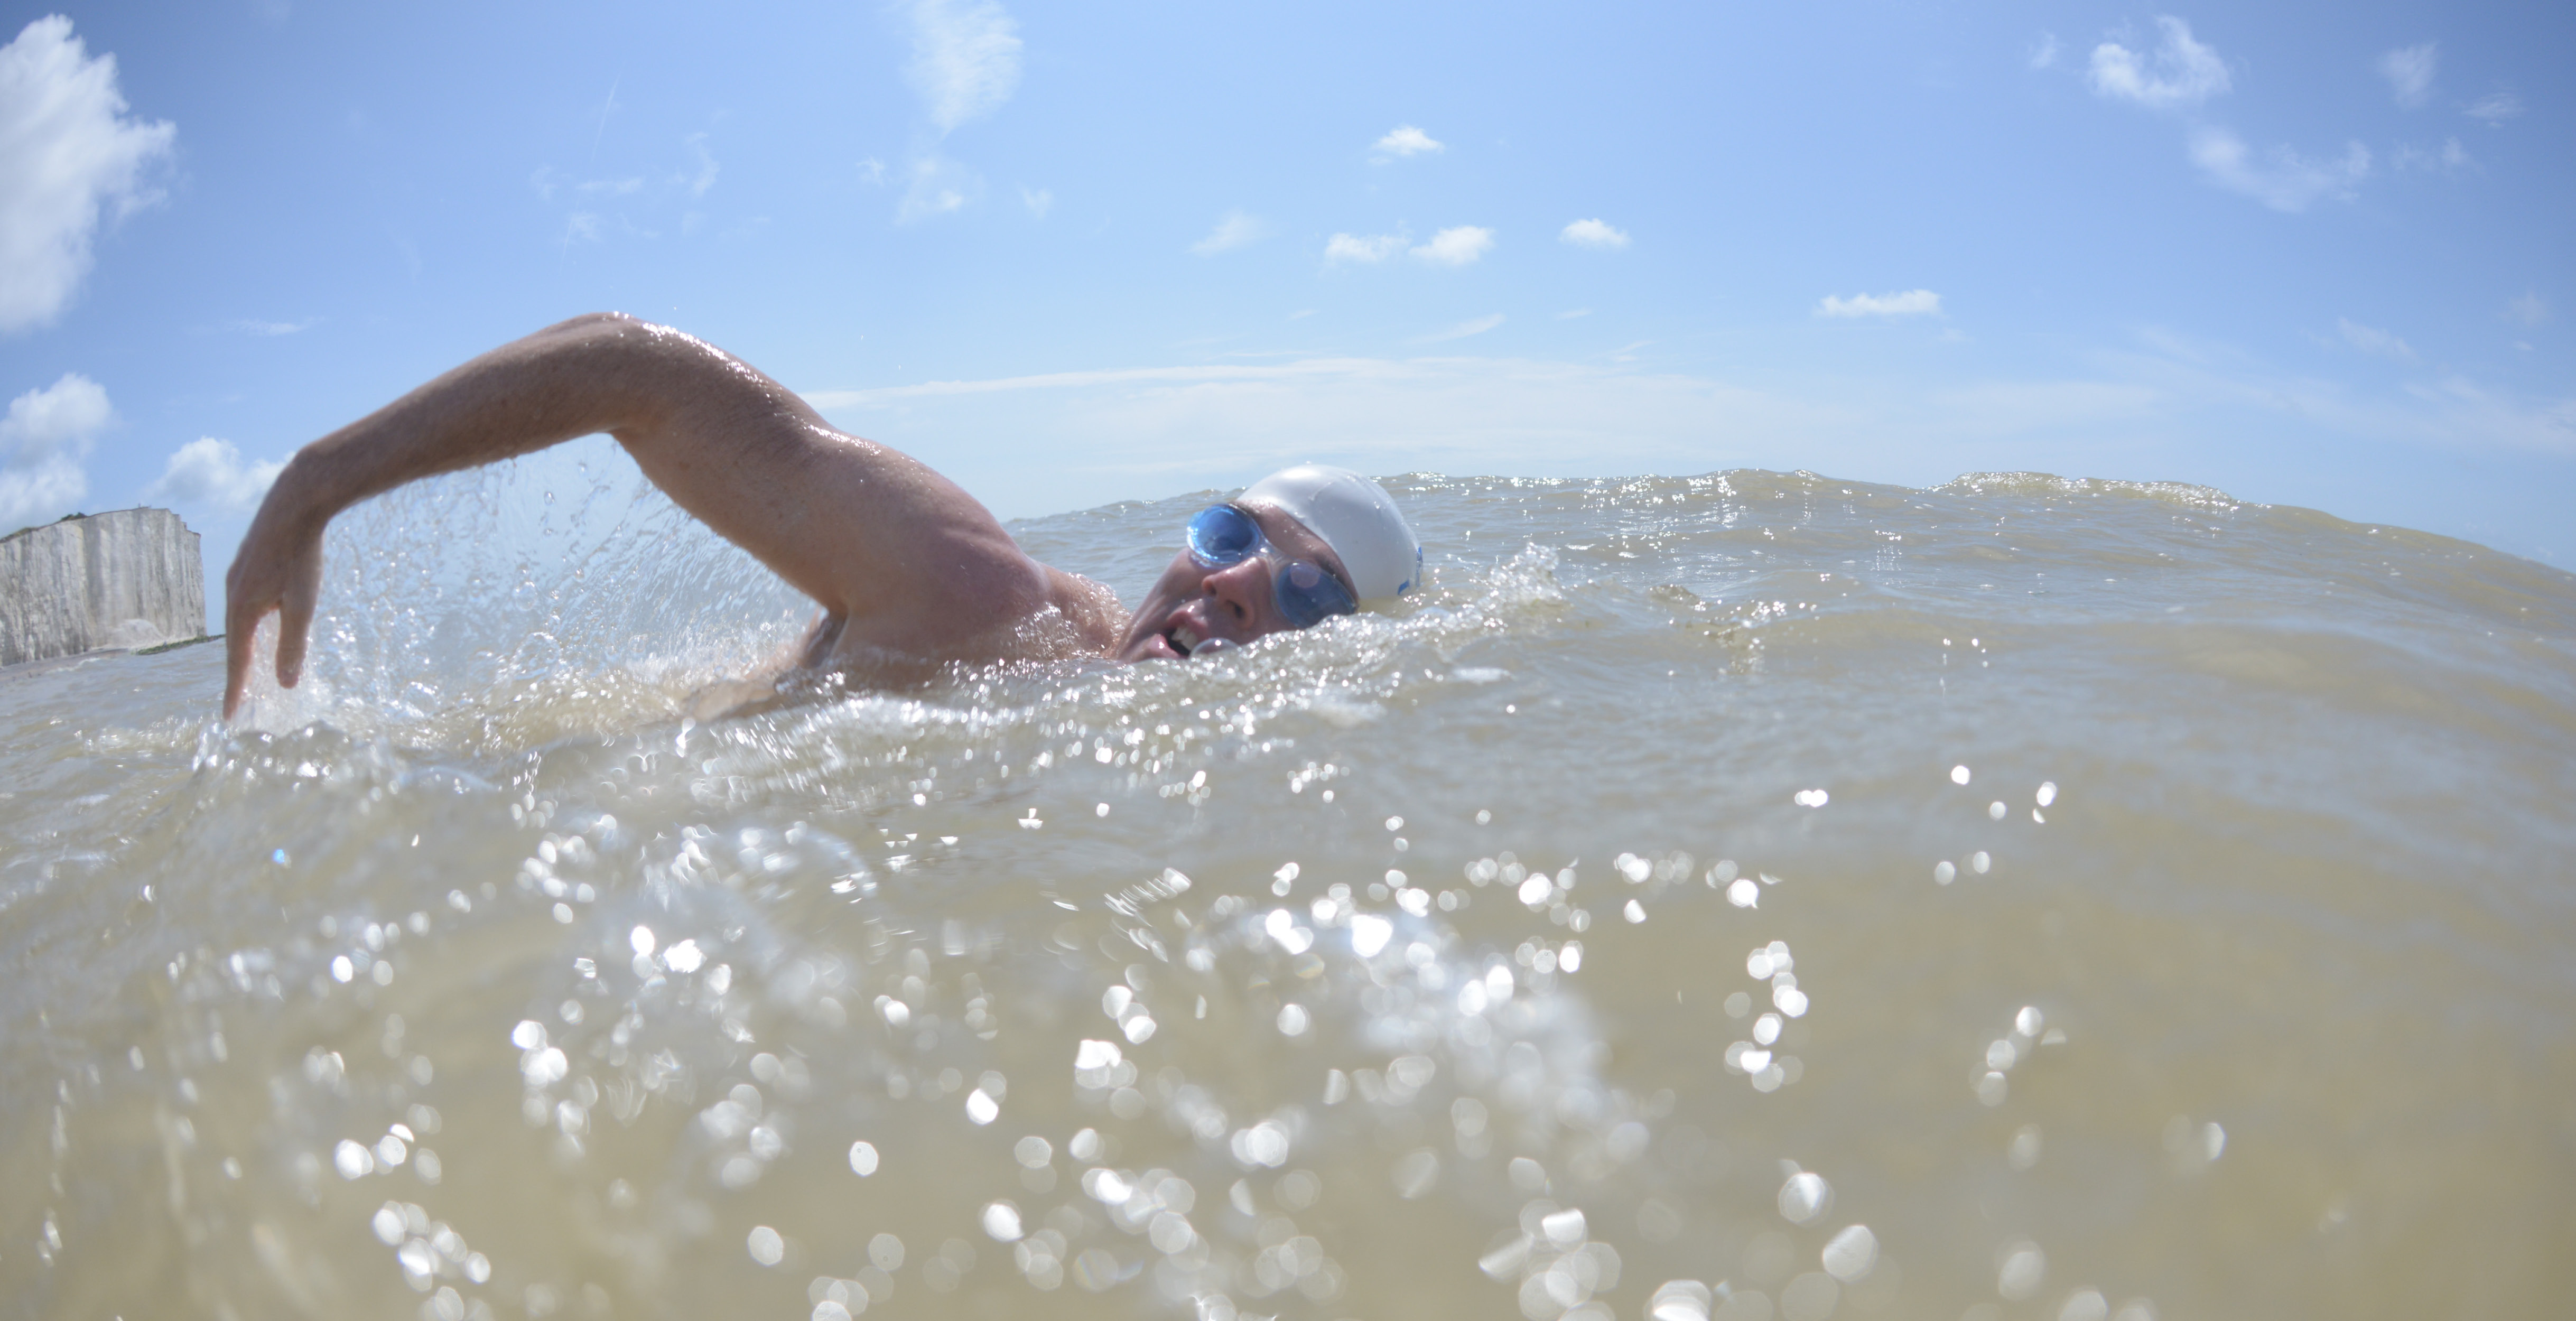 Lewis Pugh partners with Speedo for The Long Swim - Lands’ End to Dover